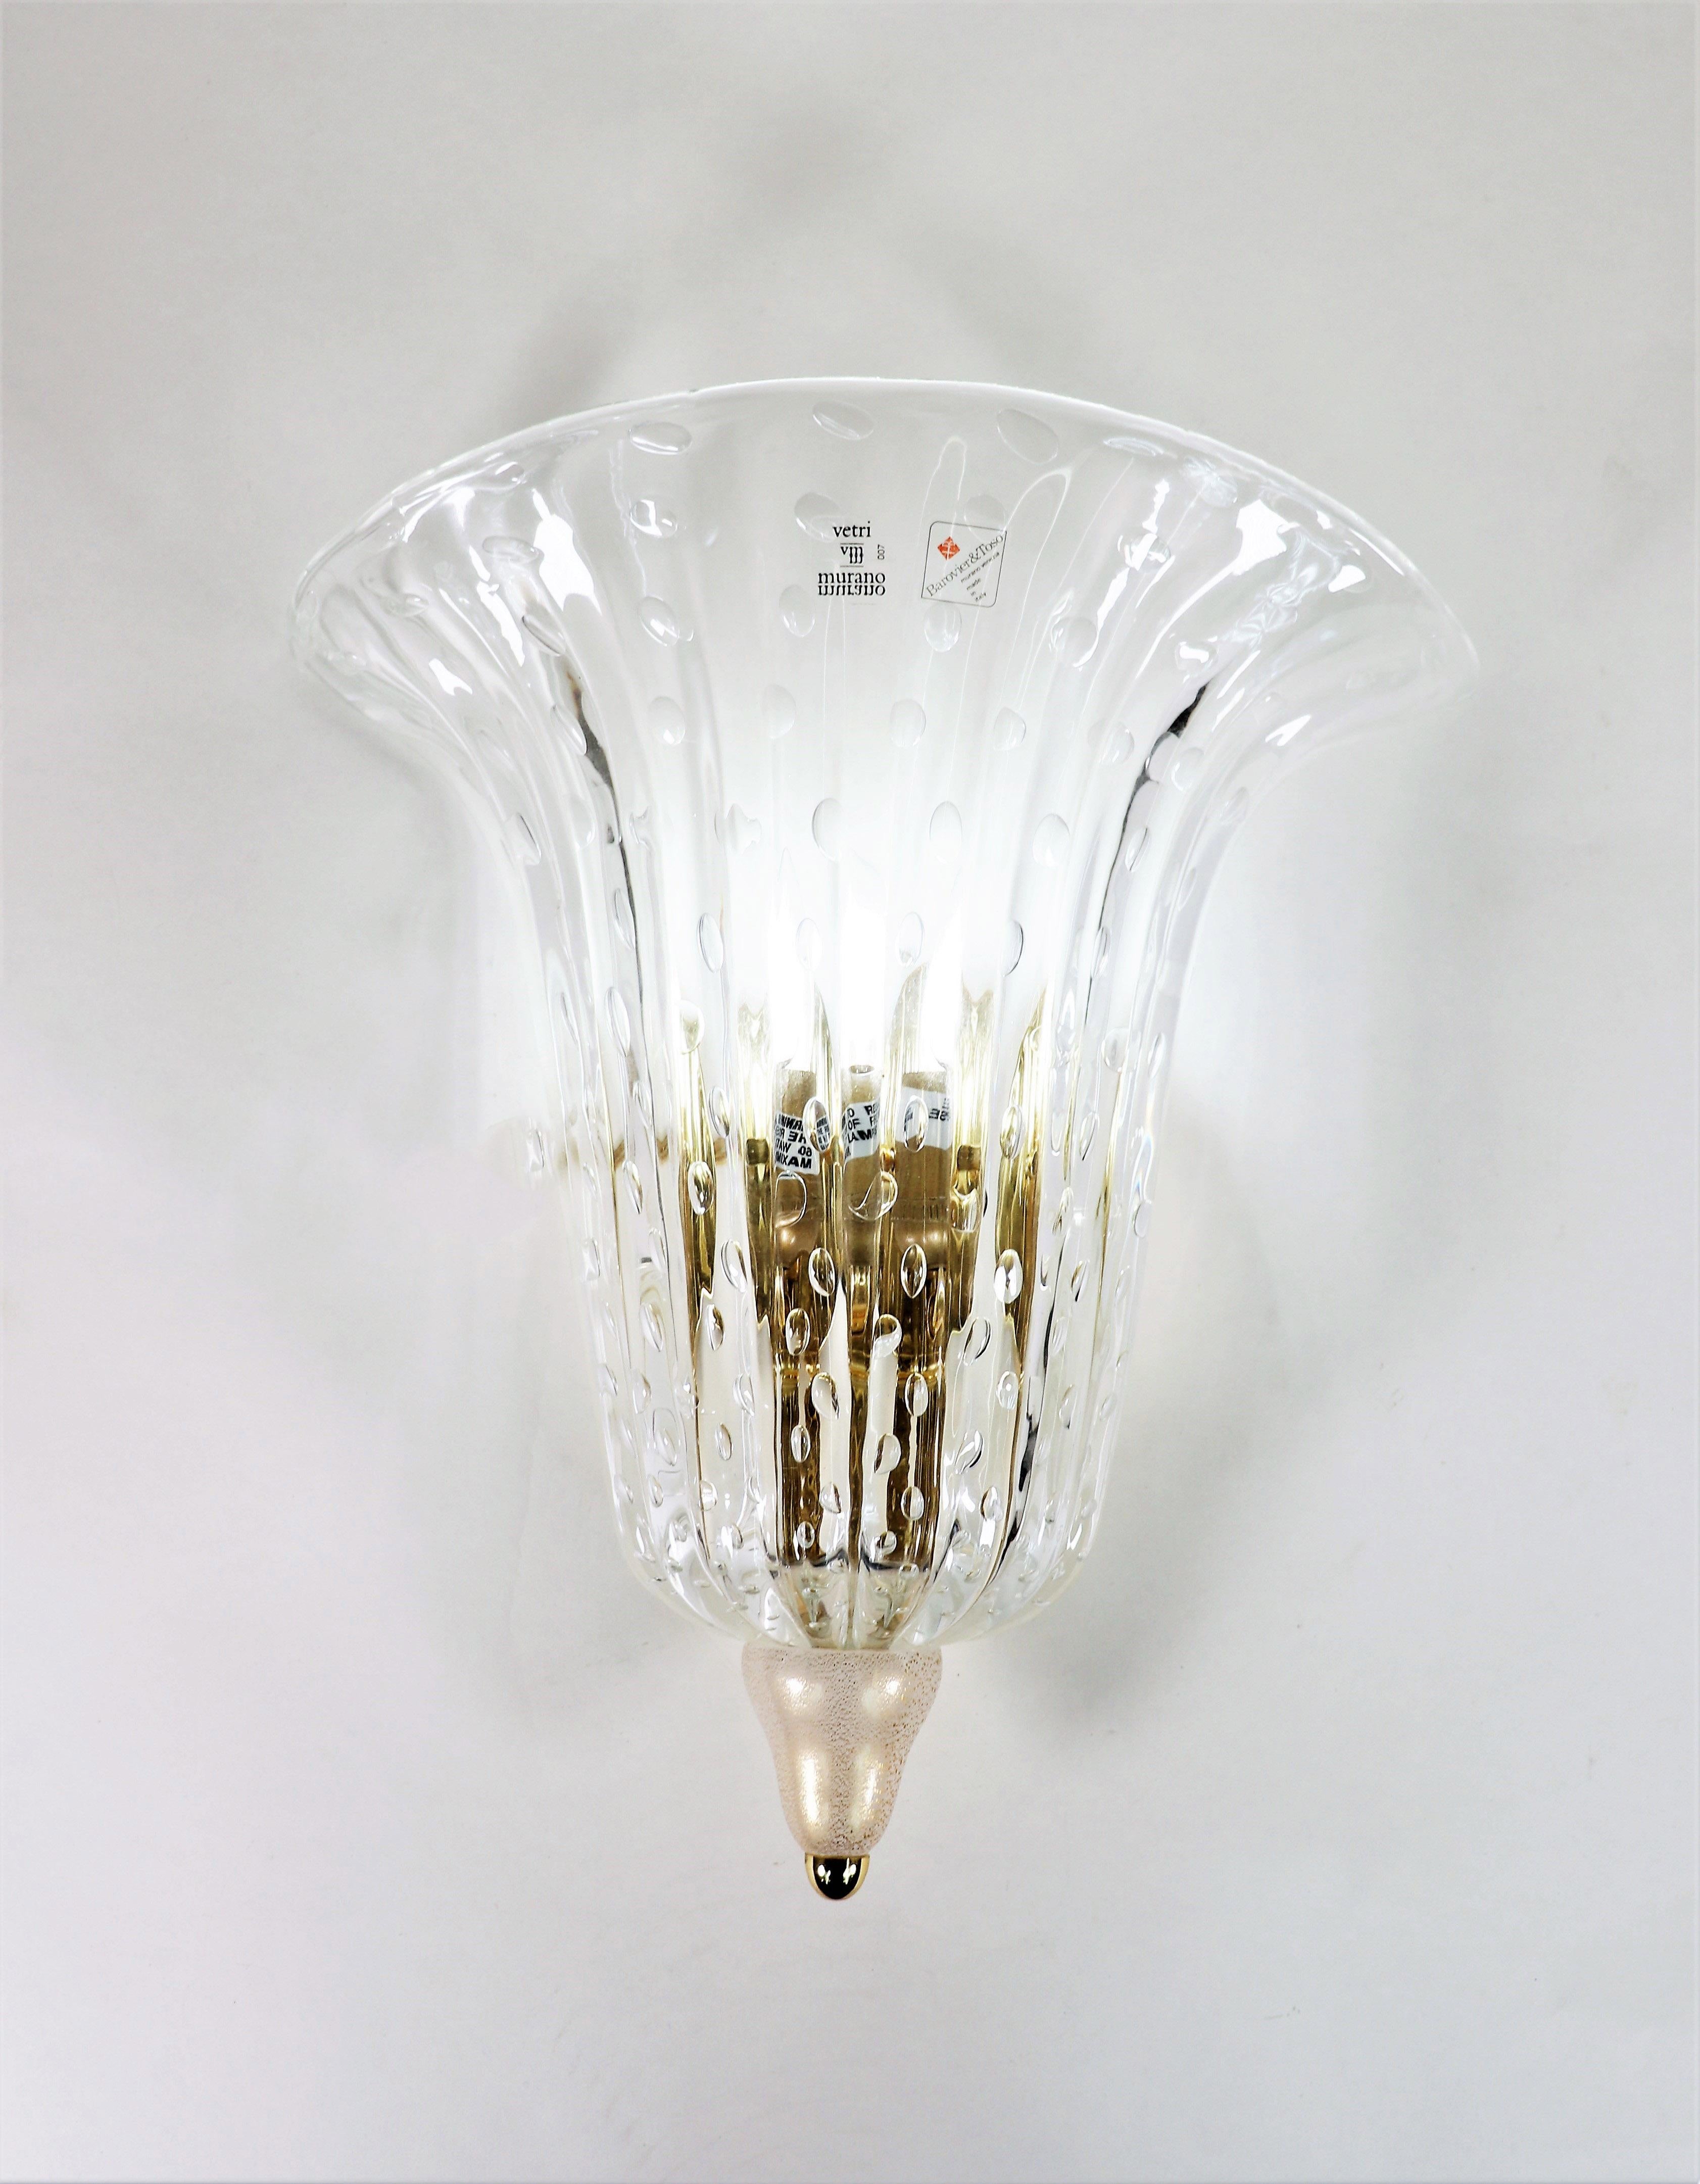 This exquisite sconce is crafted by the legendary Murano glass studio, Barovier and Toso. 

The clear shade is decorated with 